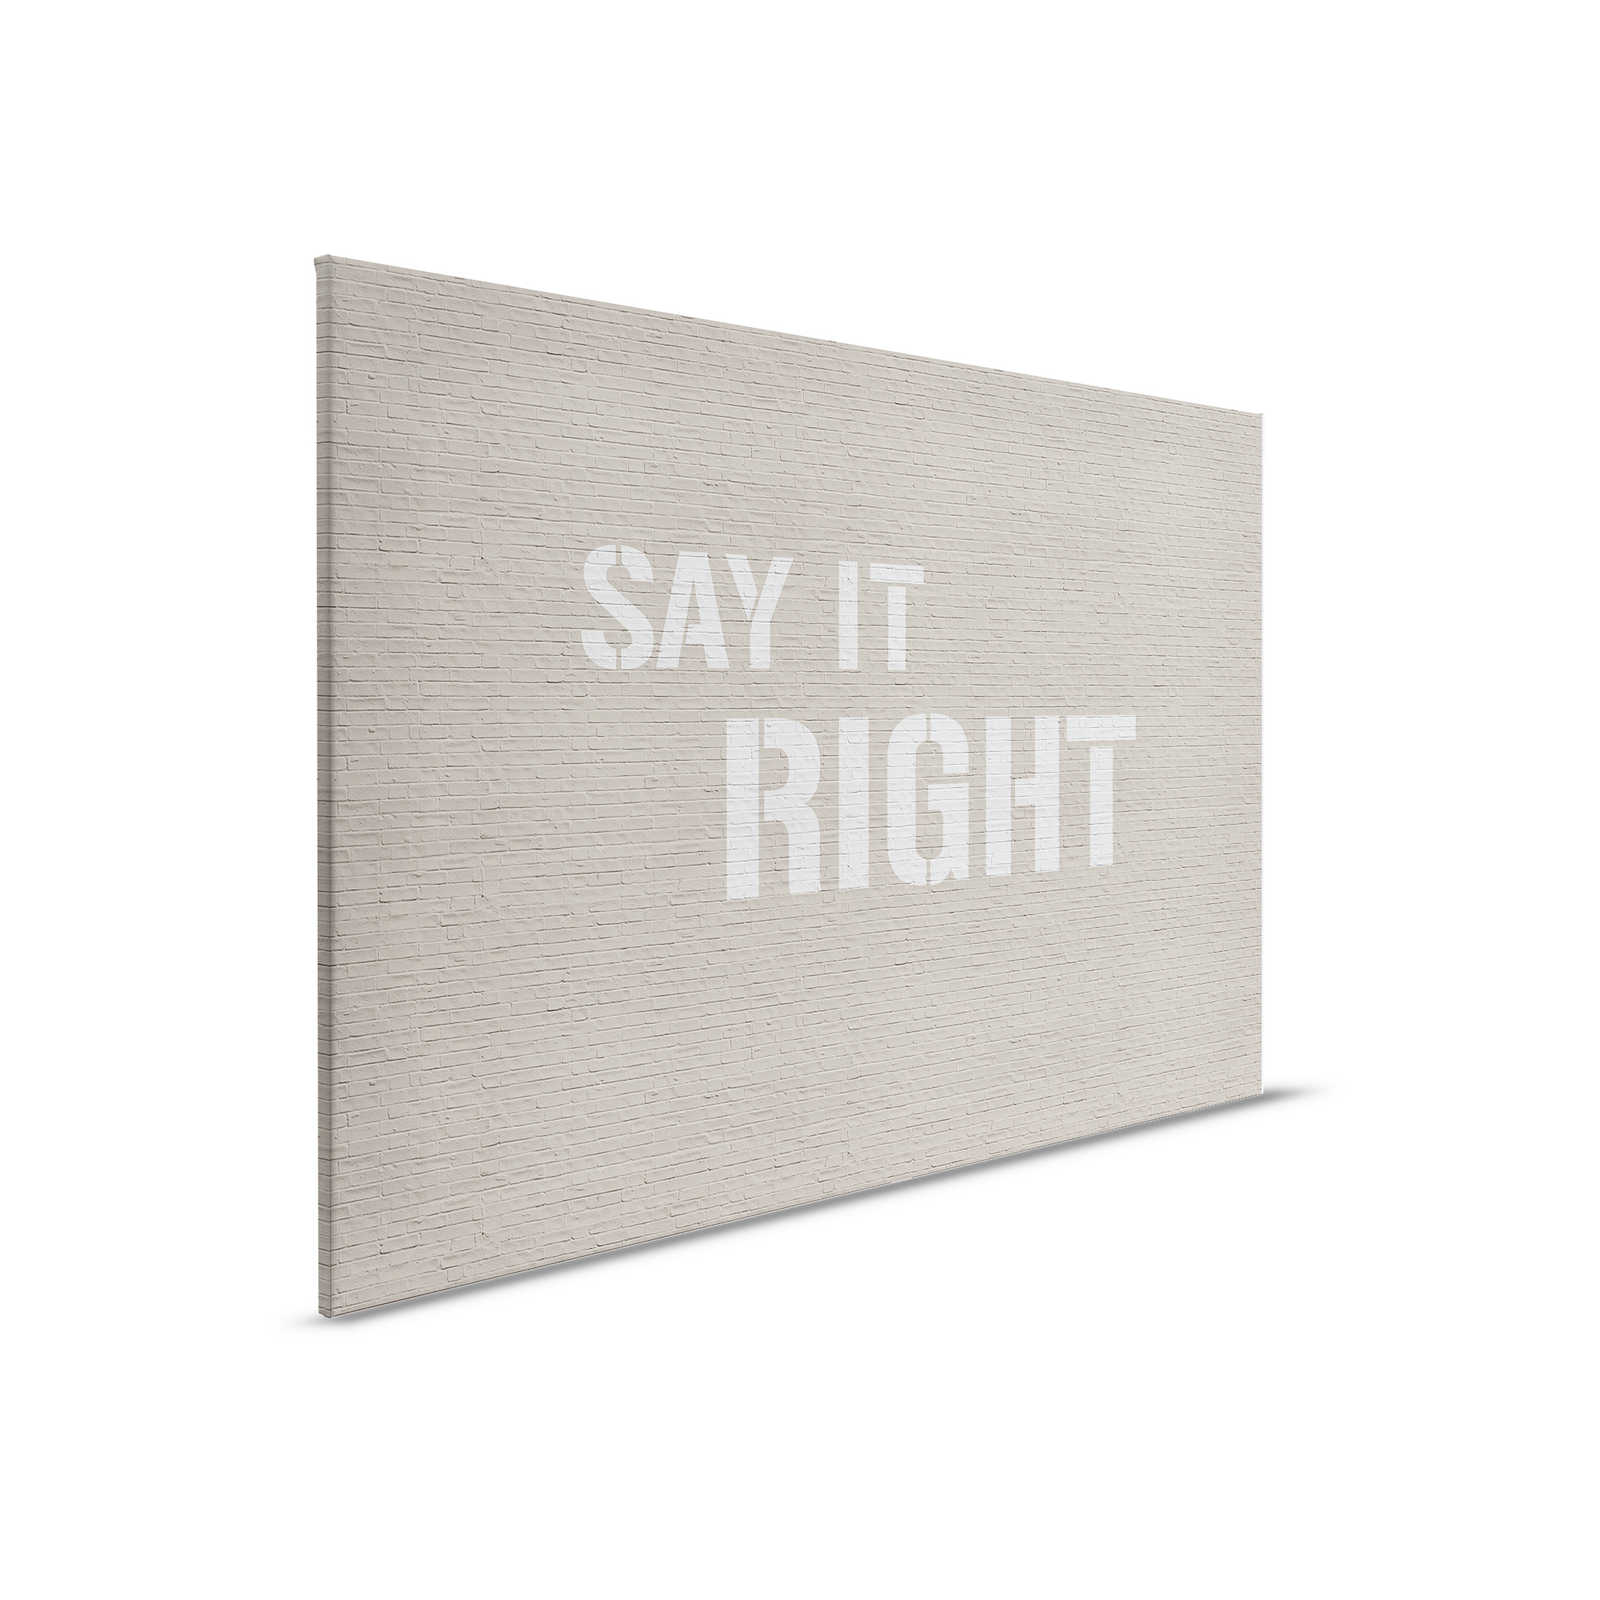         Message 2 - Beige clinker wall with saying as canvas picture - 0.90 m x 0.60 m
    